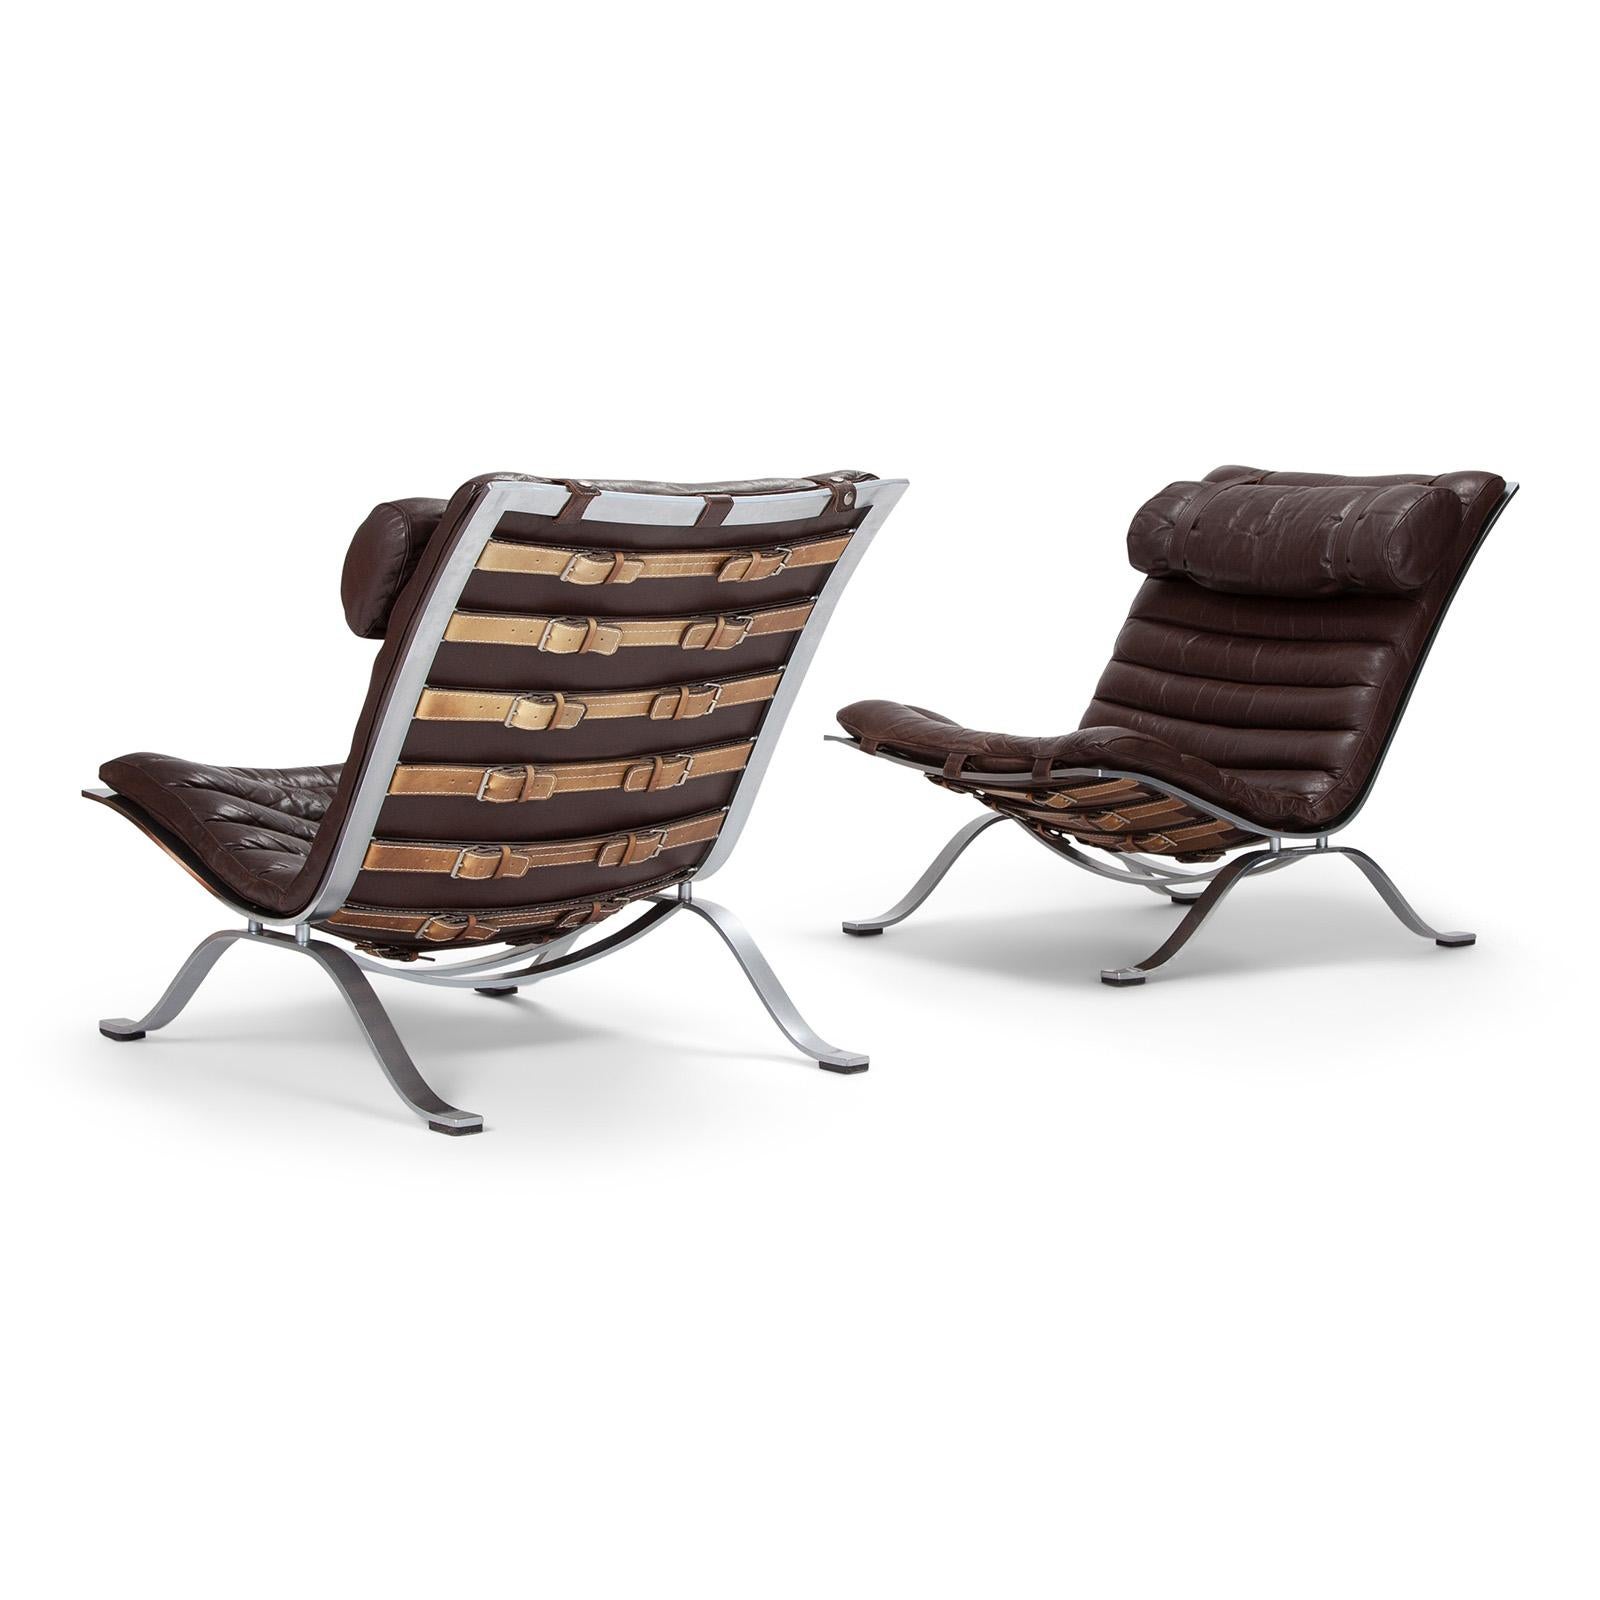 The Ari lounge chair with original dark brown leather in beautiful condition!
Designed by Arne Norell in the 1960s. Made by Norell Möbler AB, Sweden.